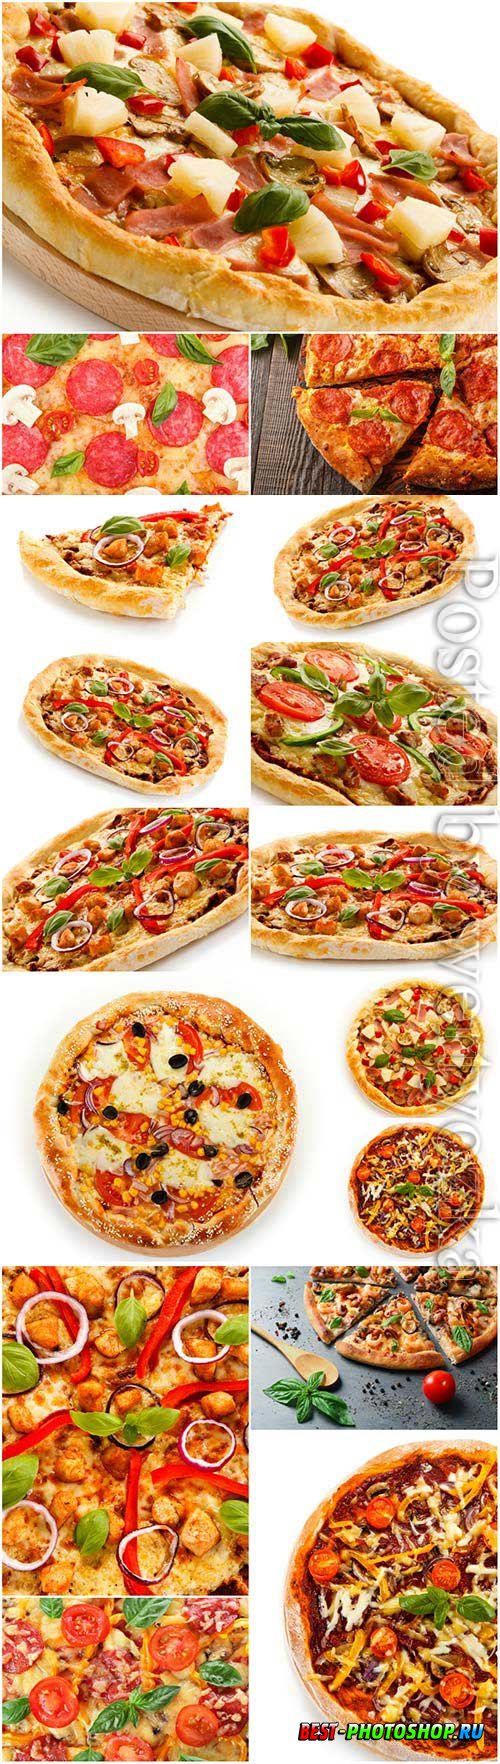 Pizza with various ingredients stock photo